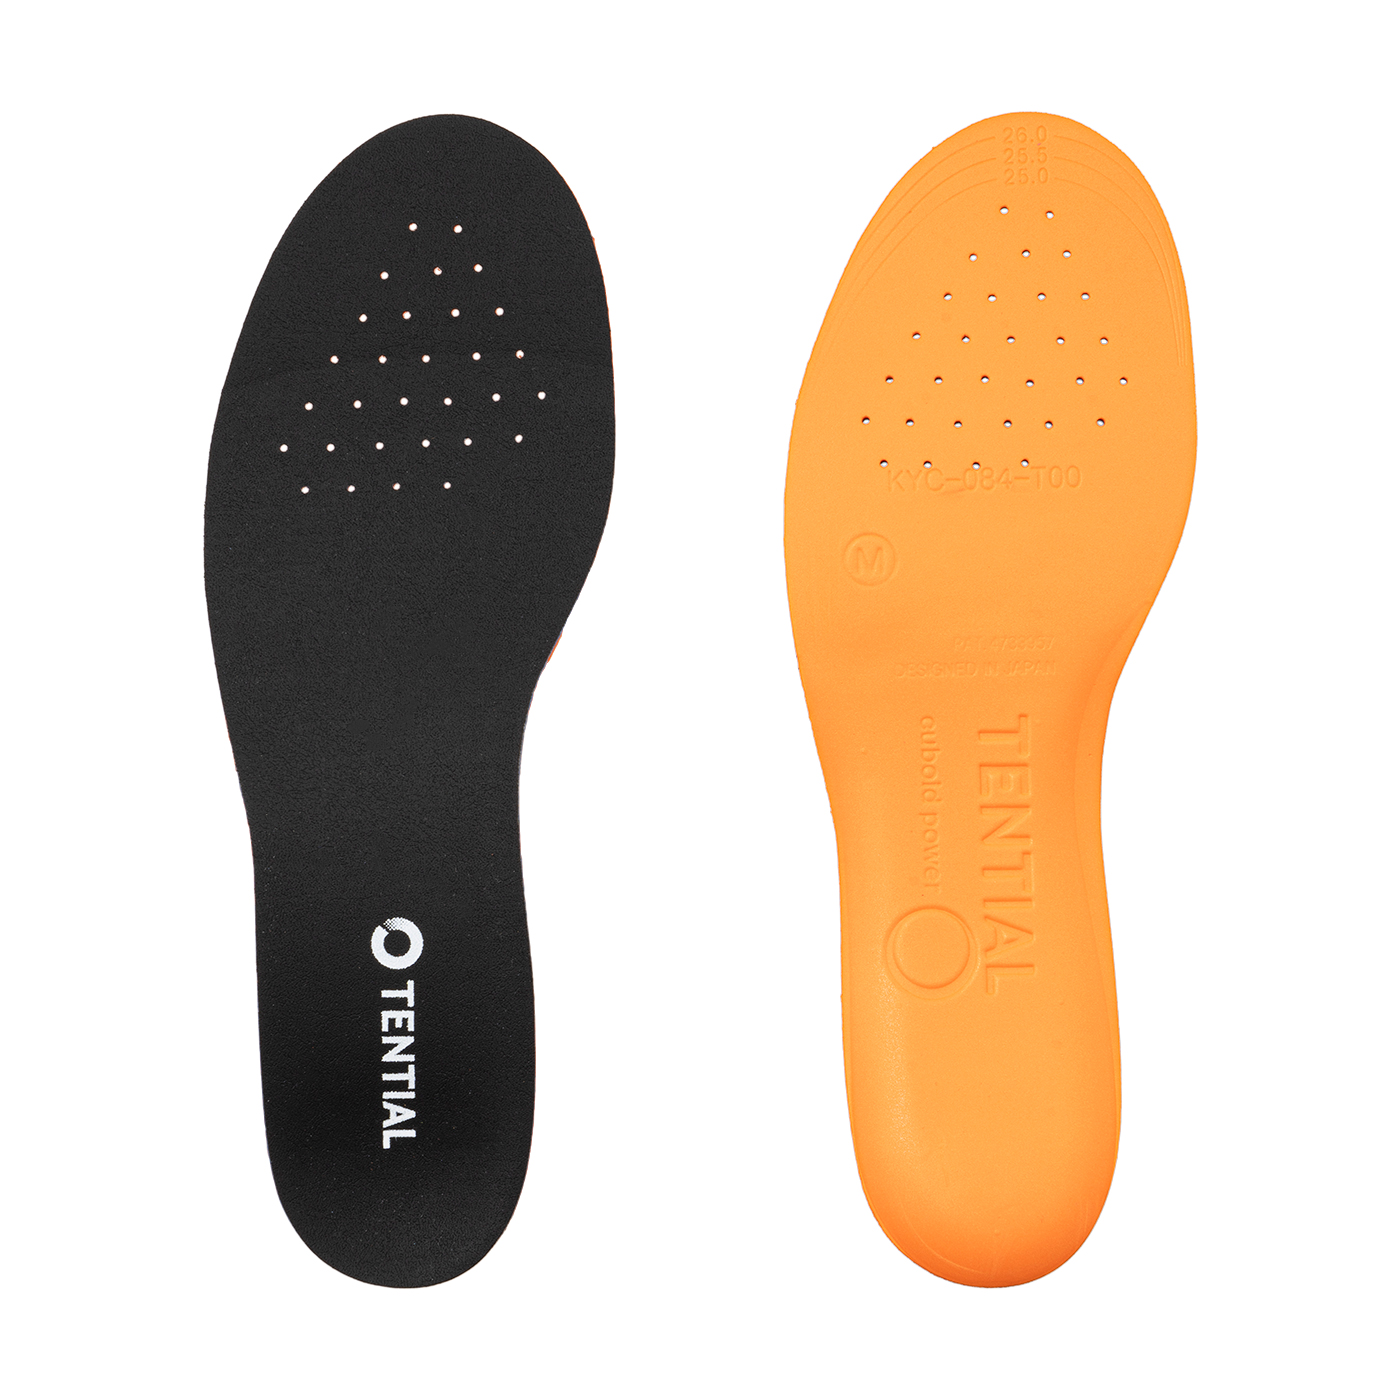 TENTIAL INSOLE Liteを全52商品と比較！口コミや評判を実際に使ってレビューしました！ | mybest